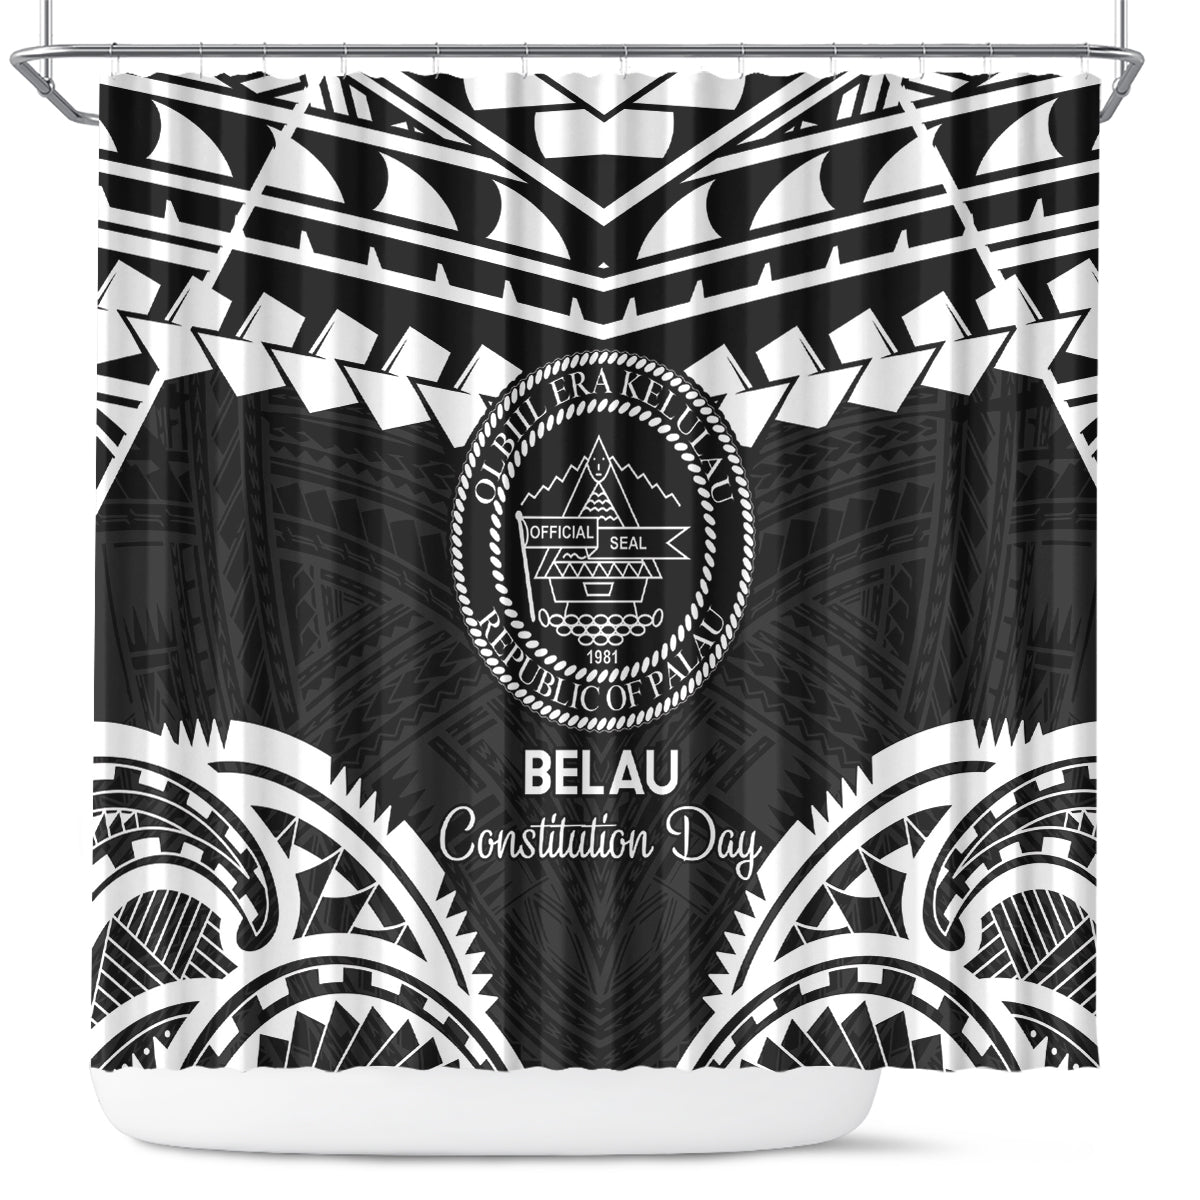 Palau Constitution Day Shower Curtain Belau Seal With Polynesian Pattern - Black